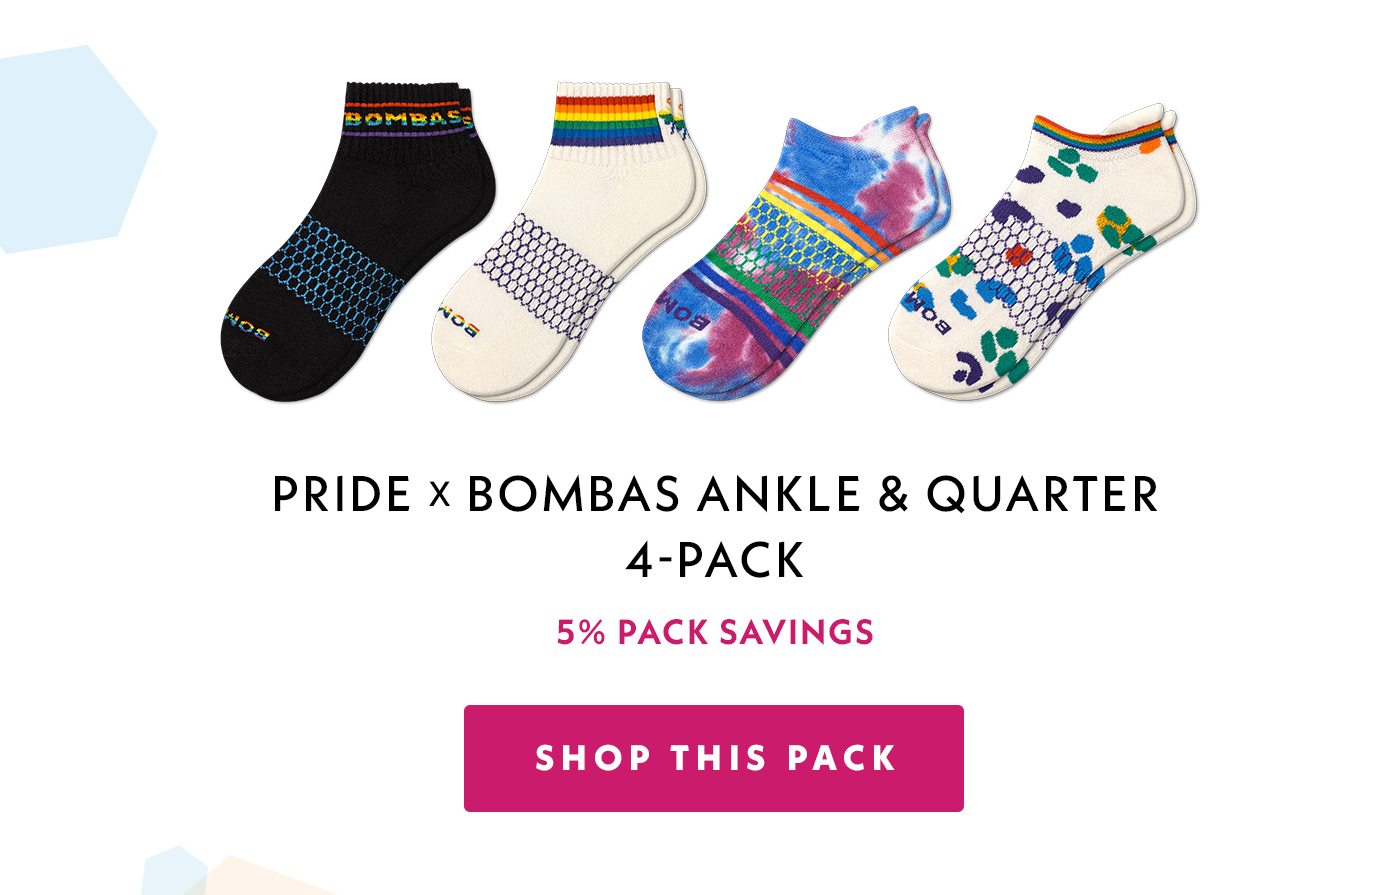 Pride x Bombas Ankle and Quarter 4-Pack | 5% Pack Savings | Shop This Pack